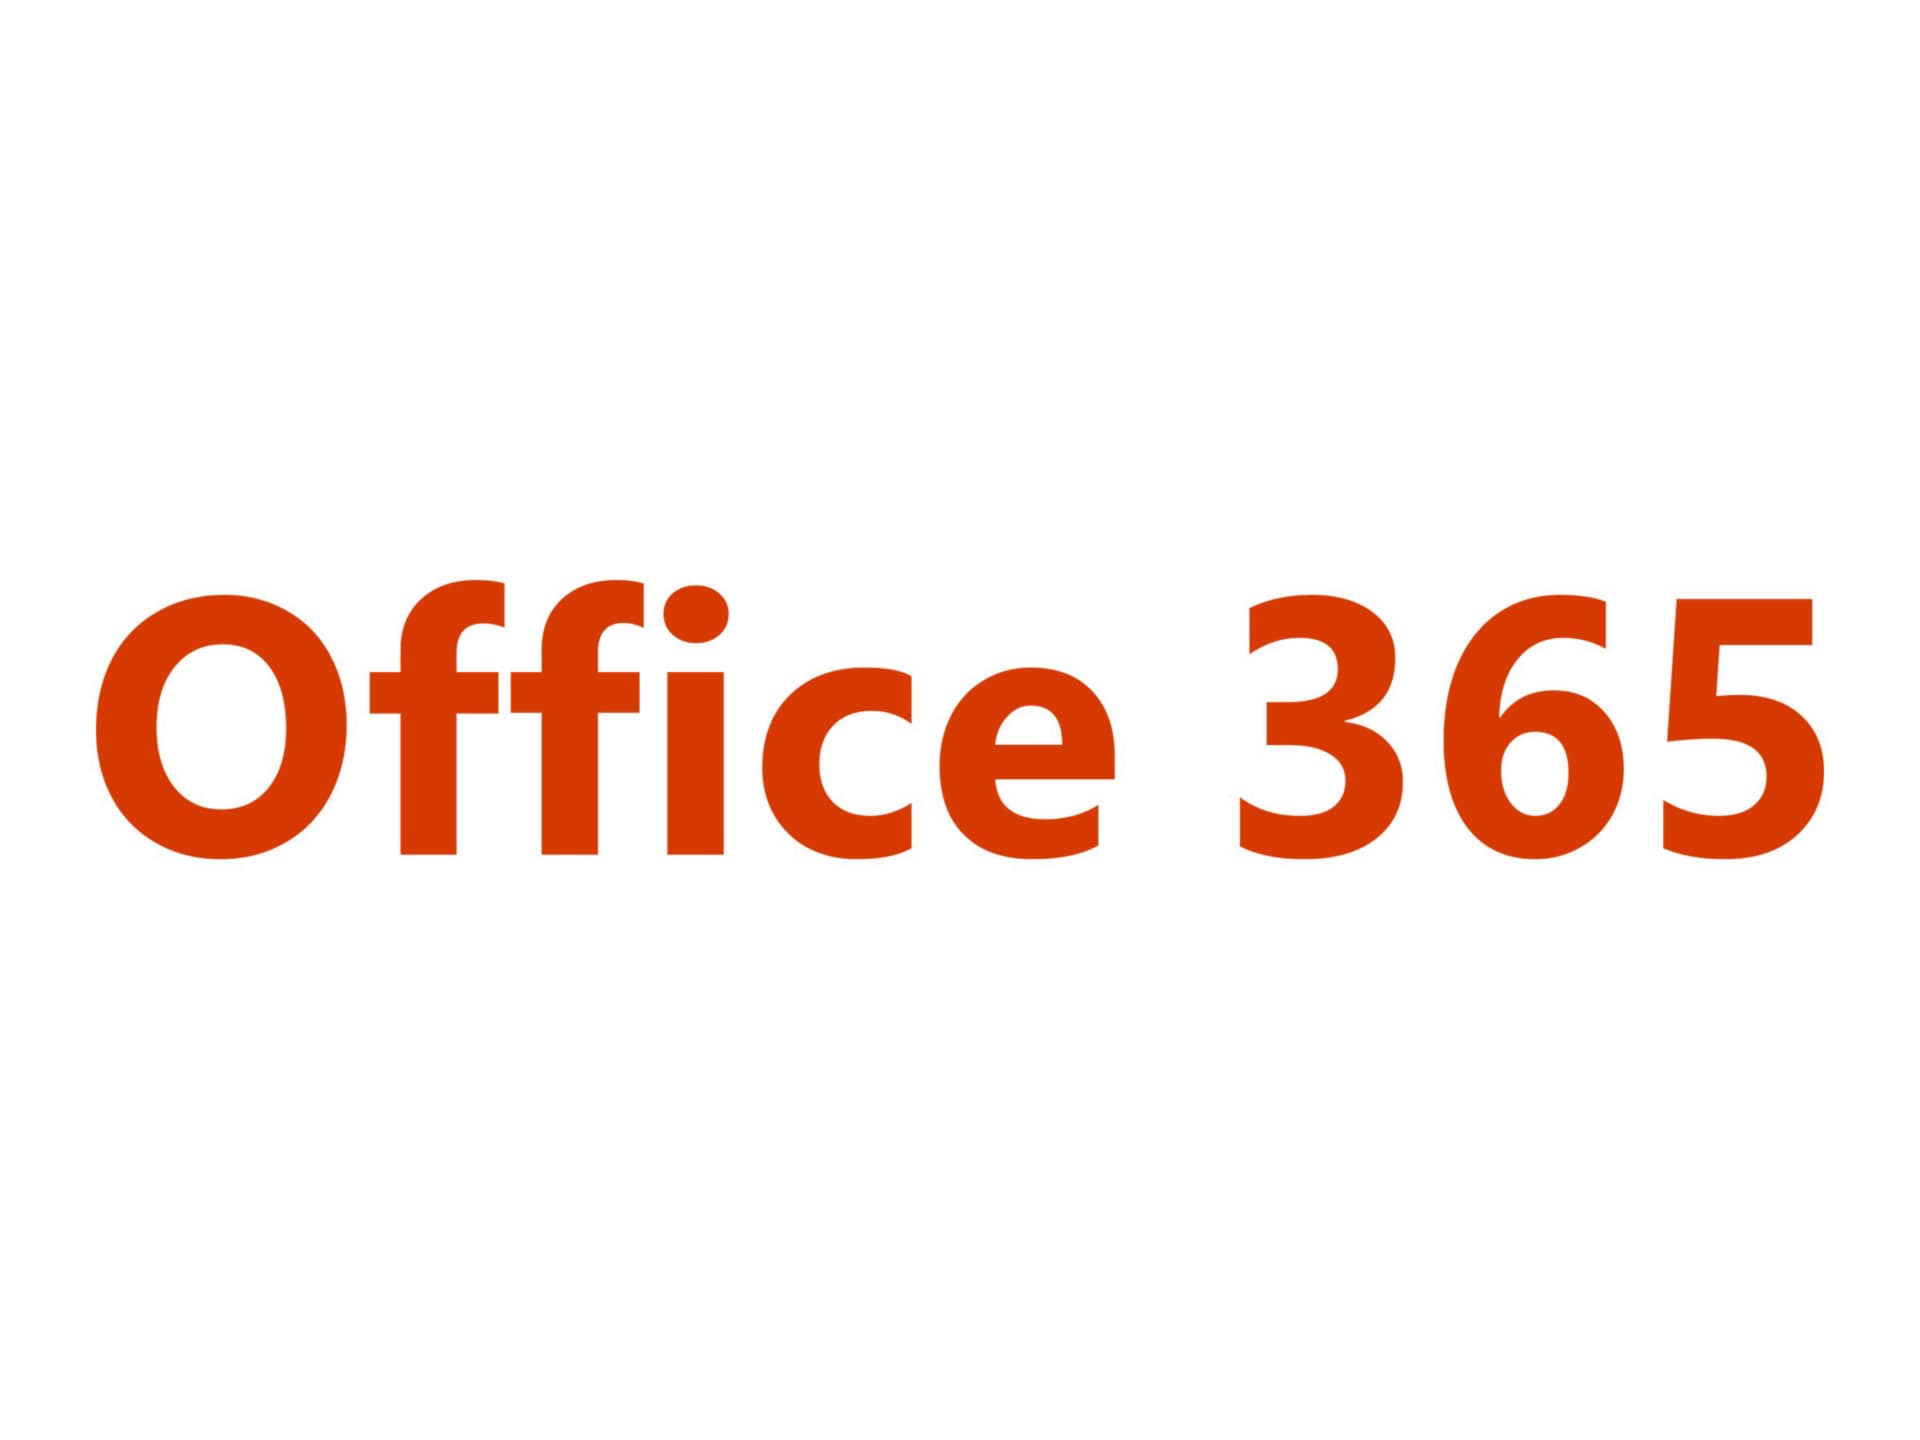 Microsoft Office 365 Advanced Threat Protection Plan 2 - step-up subscription license - 1 user